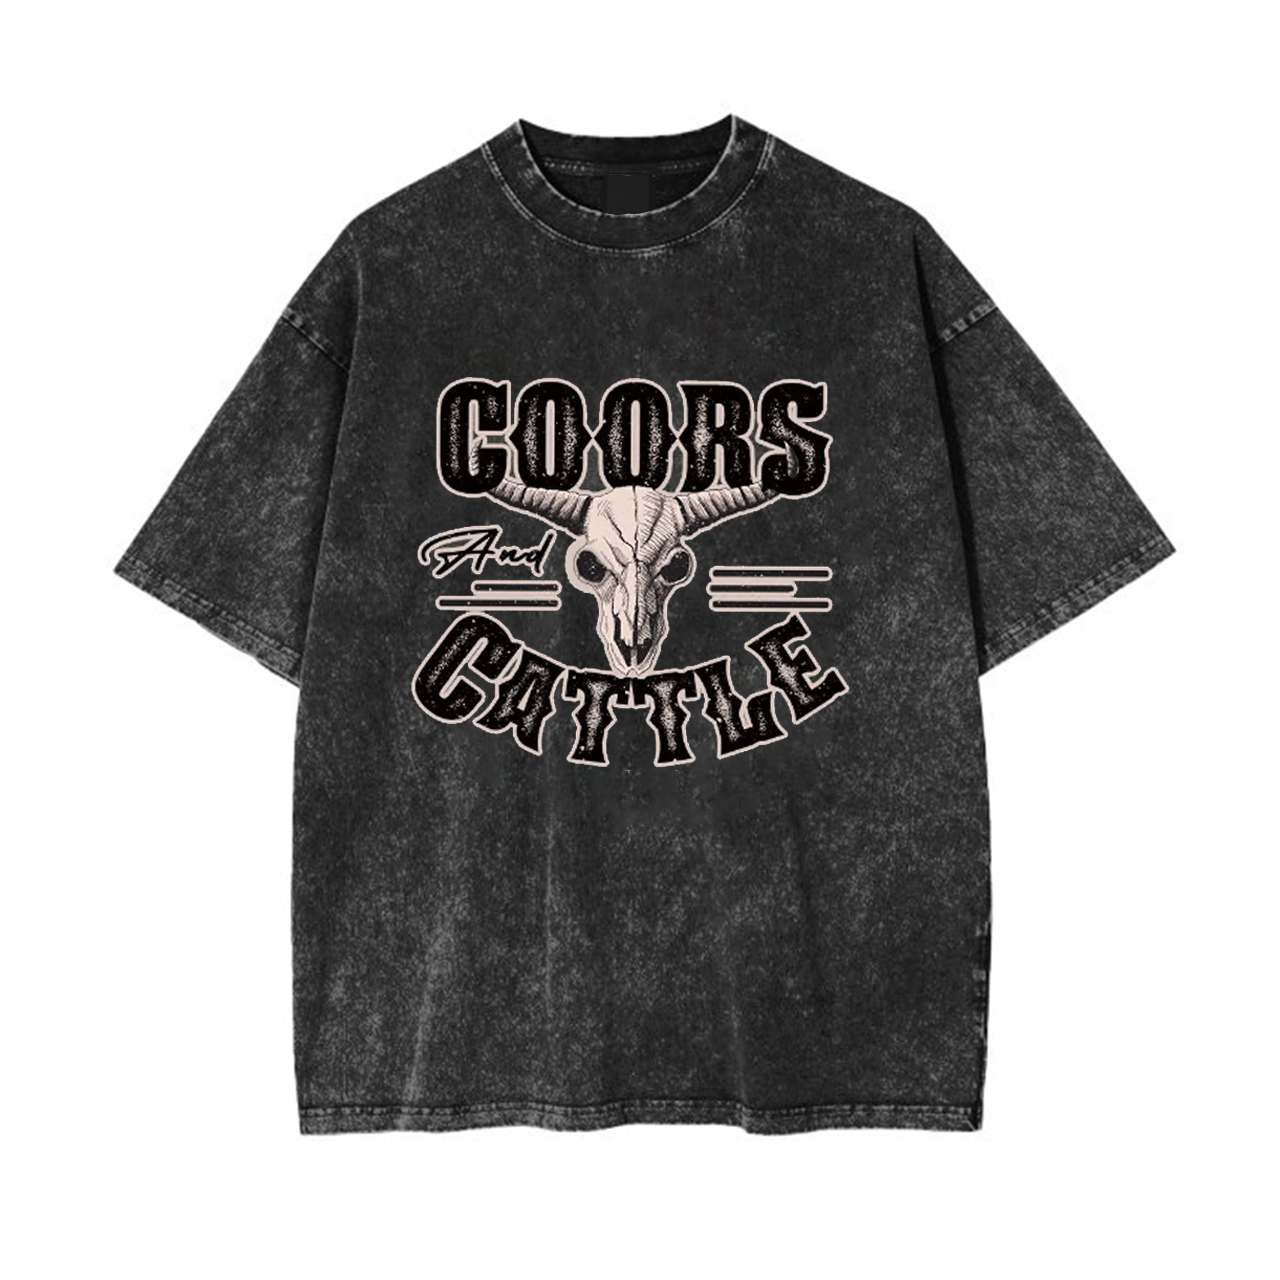 Coors And Cattle Cowboy Garment-dye Tees